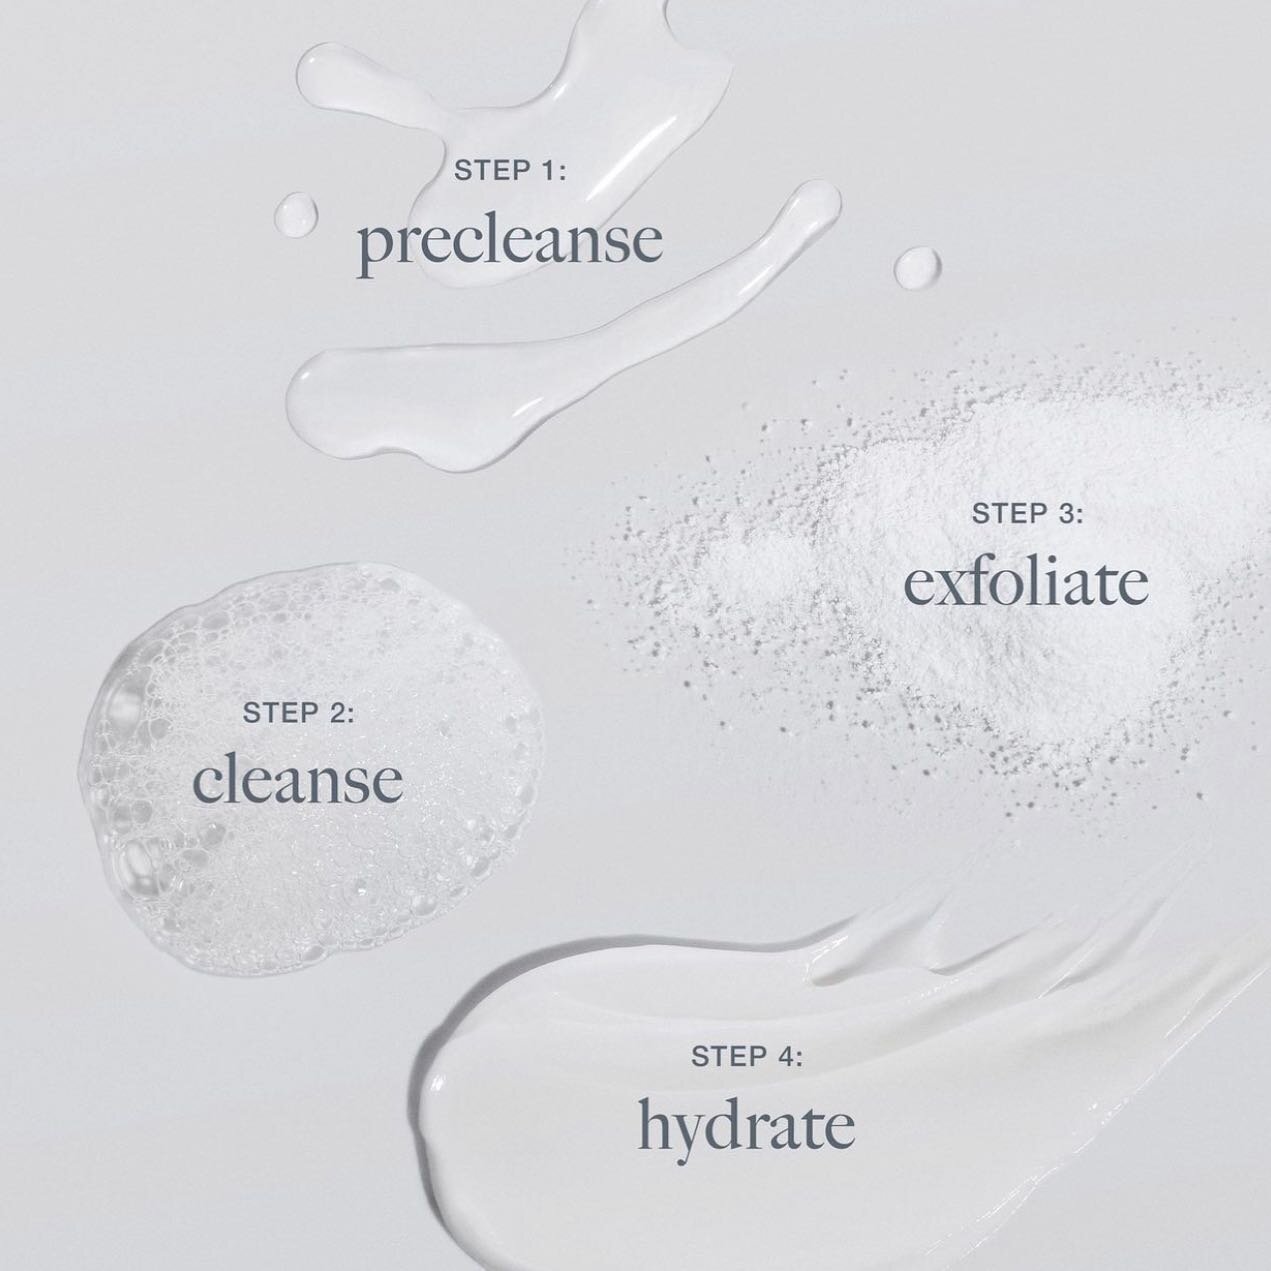 Luxci Skin Tip 💧

The Four Important Steps to every Skin Regimen! 

1. Precleanse ( oil cleansing is the best) 
2. Cleanse ( this is your double cleanse) 
3. Exfoliate ( powder , aha bha acid , gommage exfoliants ) 
4. Hydrate ( serums , moisterizer